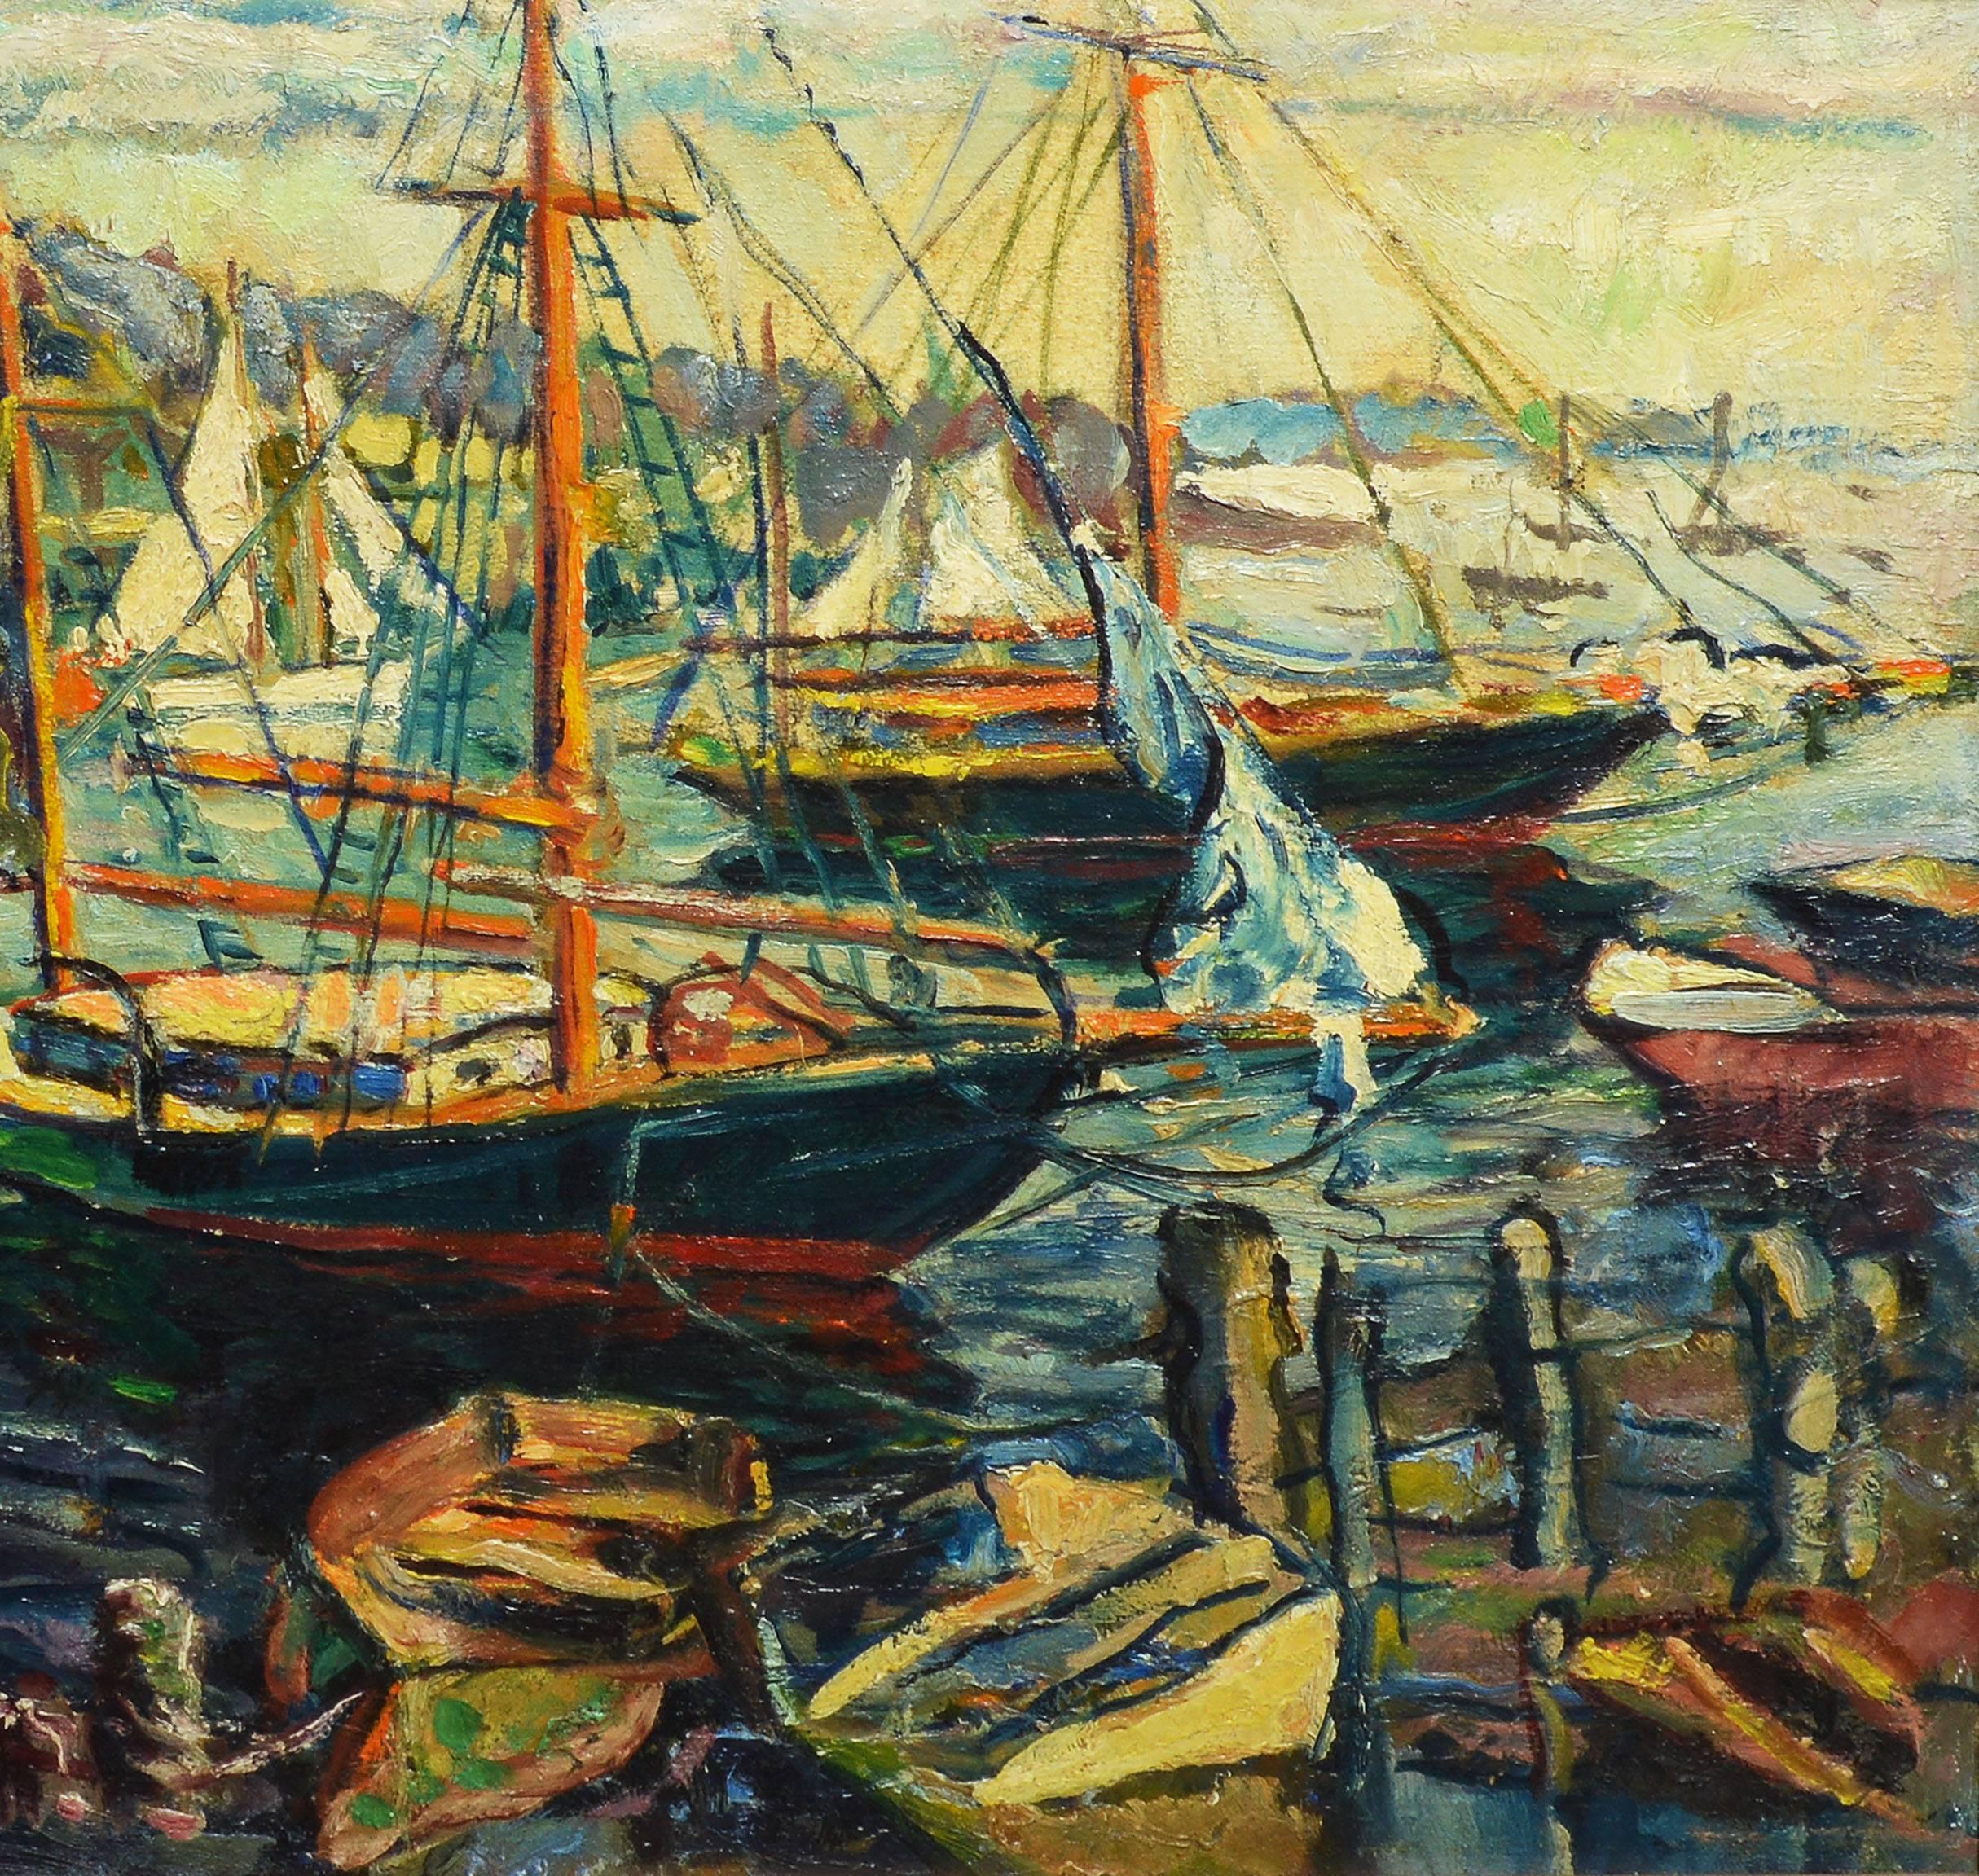 Impressionist seascape painting of busy New England harbor. Oil on canvas, circa 1930. Signed lower "M. Peterson". Displayed in a giltwood frame.  Image size, 35"L x 31"H, overall 24"L x 20"H.
